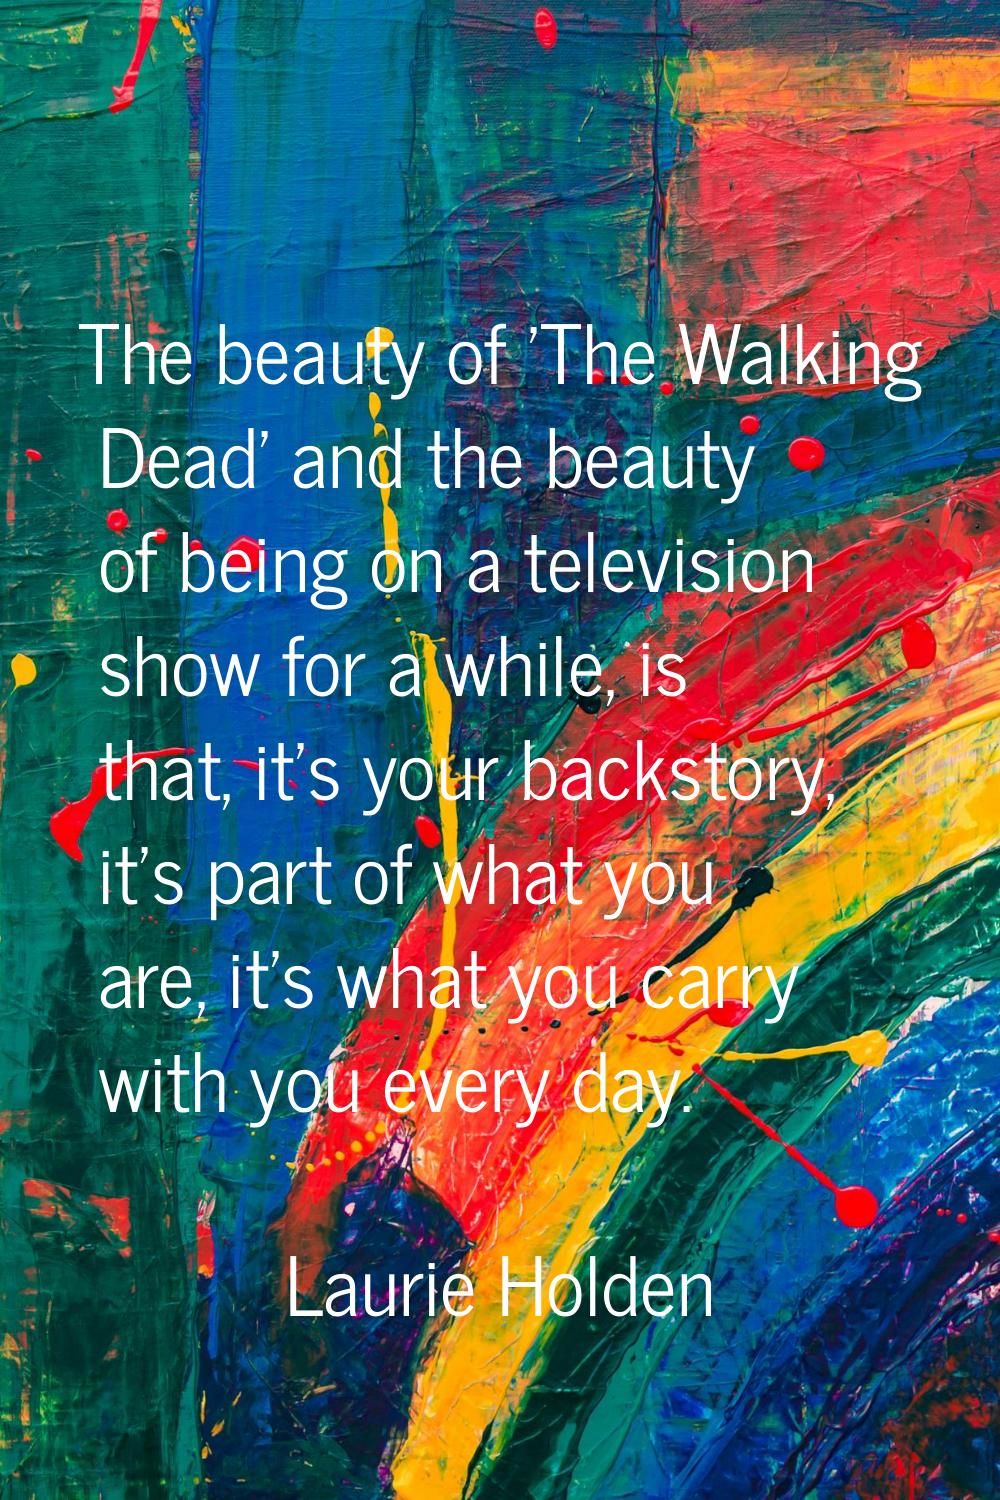 The beauty of 'The Walking Dead' and the beauty of being on a television show for a while, is that,